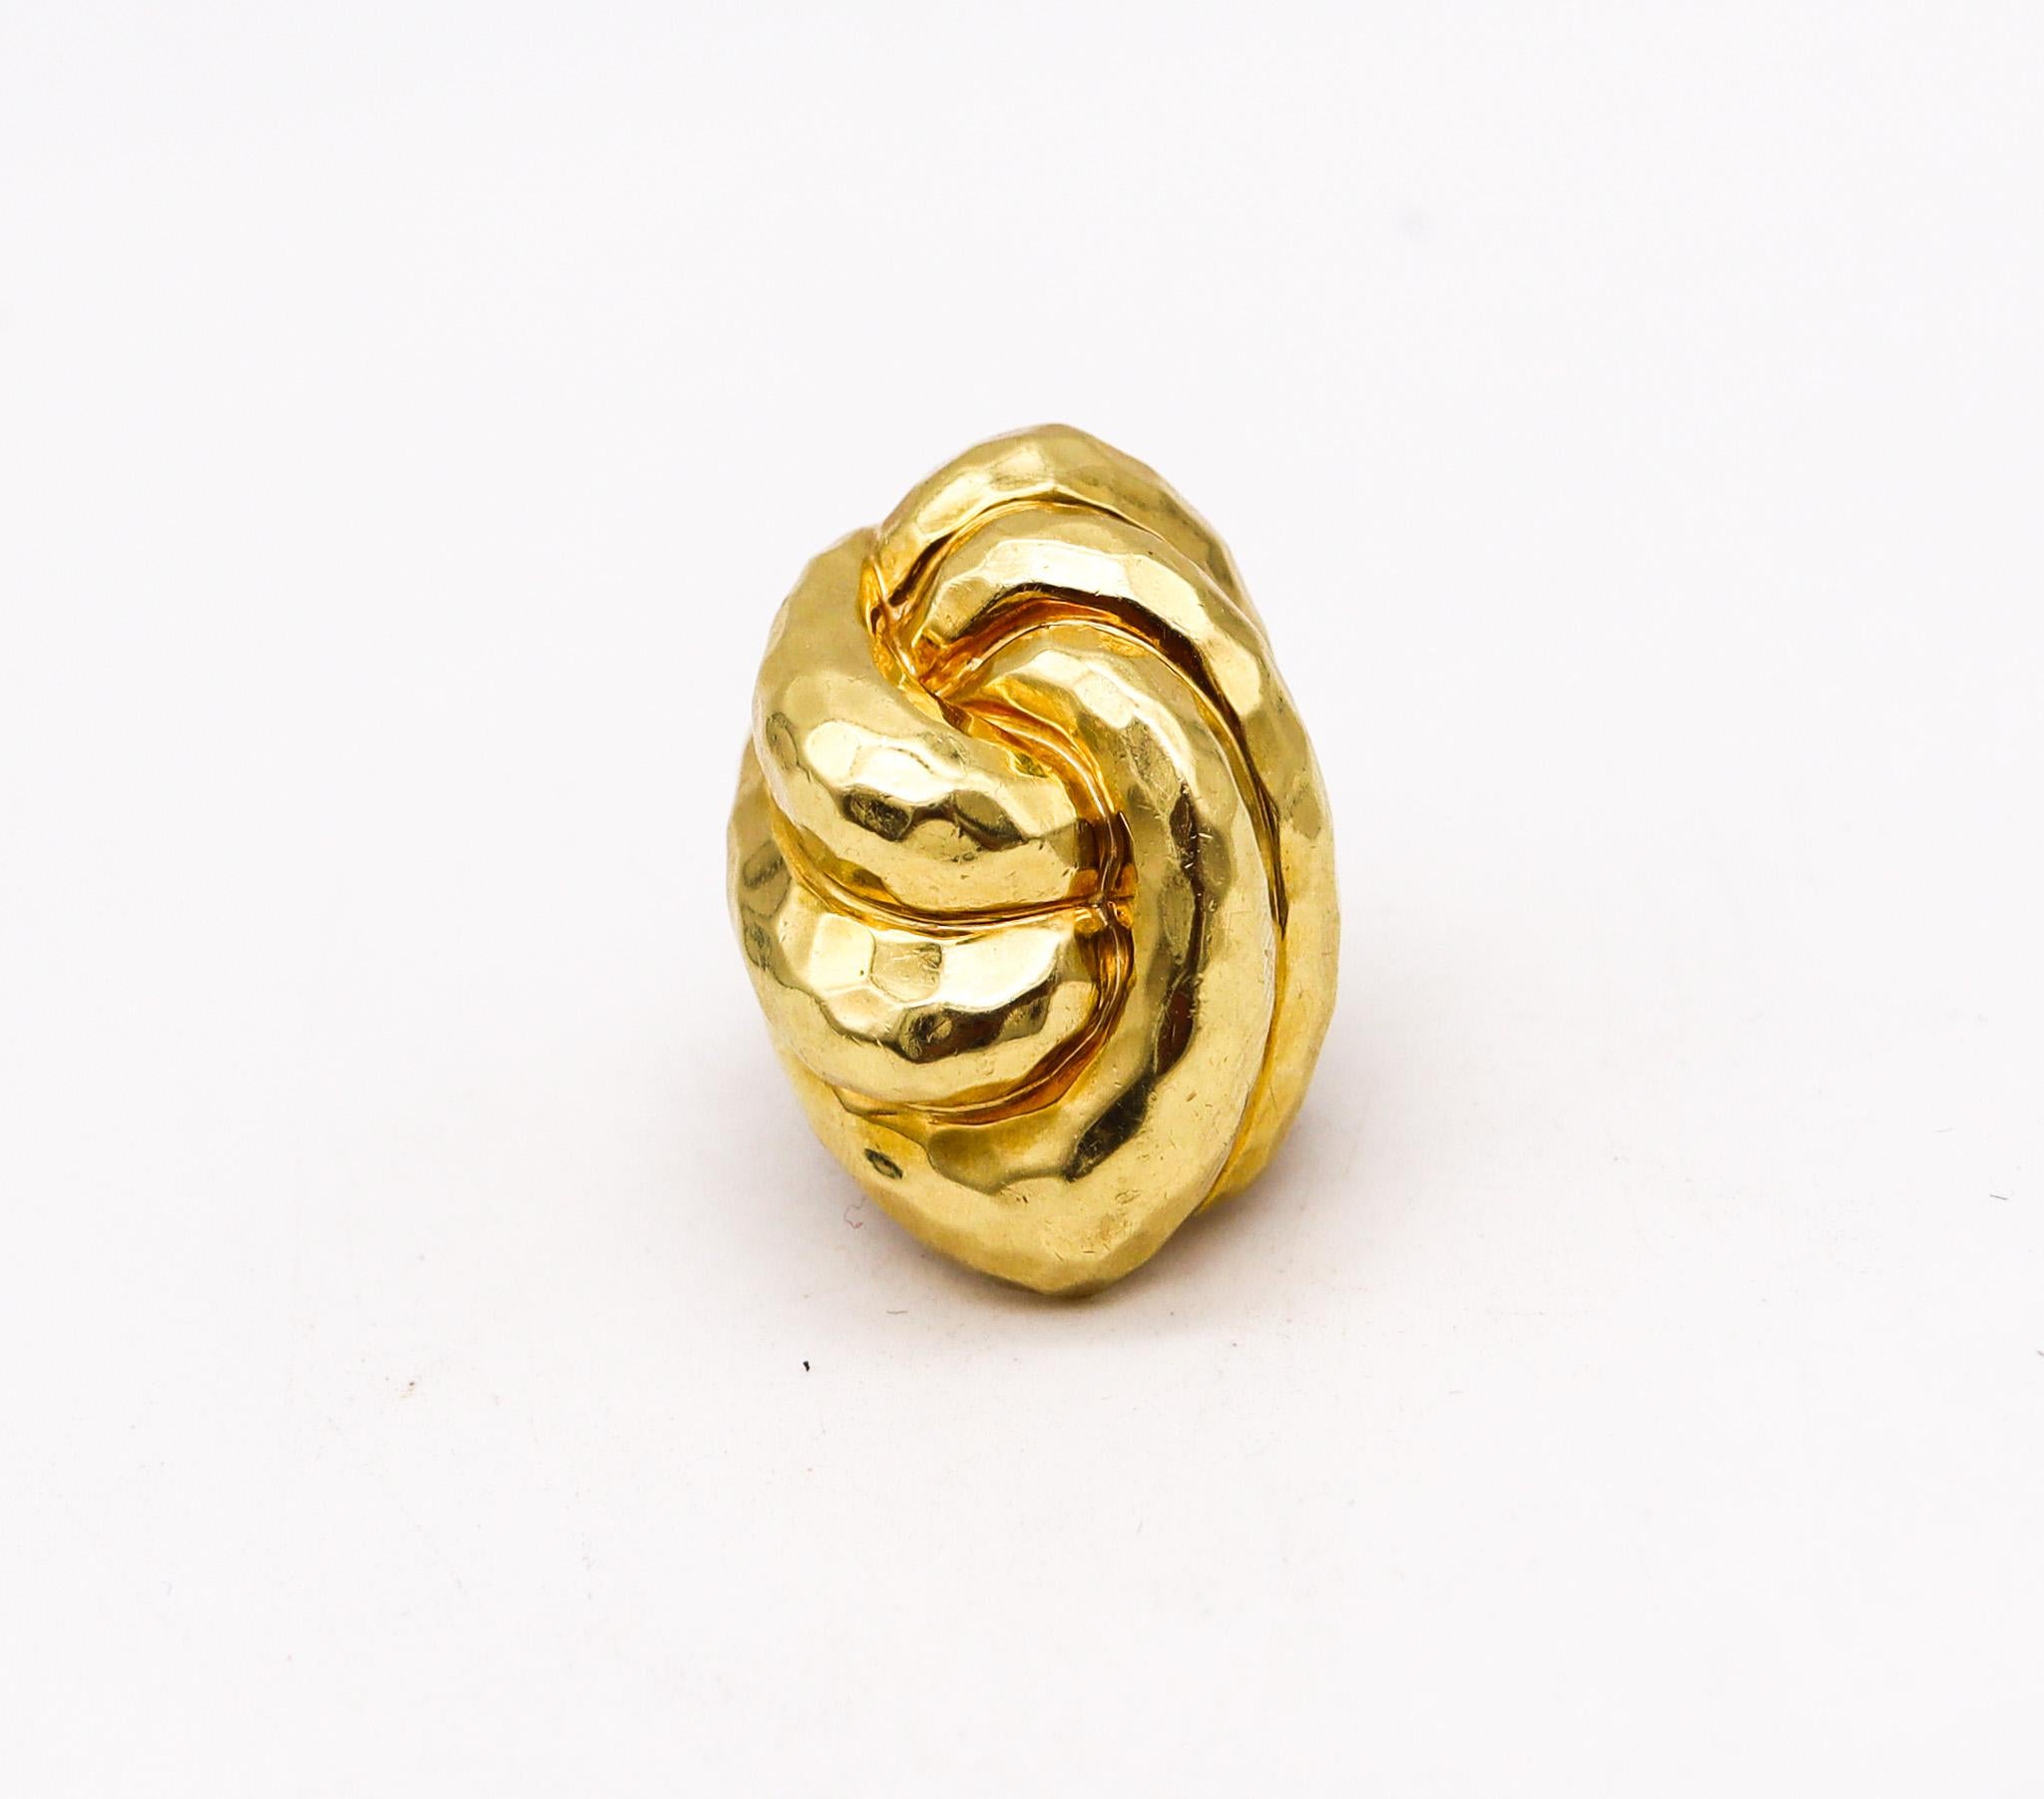 Cocktail ring designed by Henry Dunay.

Bold cocktail ring, created at the atelier of Henry Dunay in New York city, back in the 1990. This piece was crafted  in solid yellow gold of 18 karats with the entire surface finished with the iconic faceted